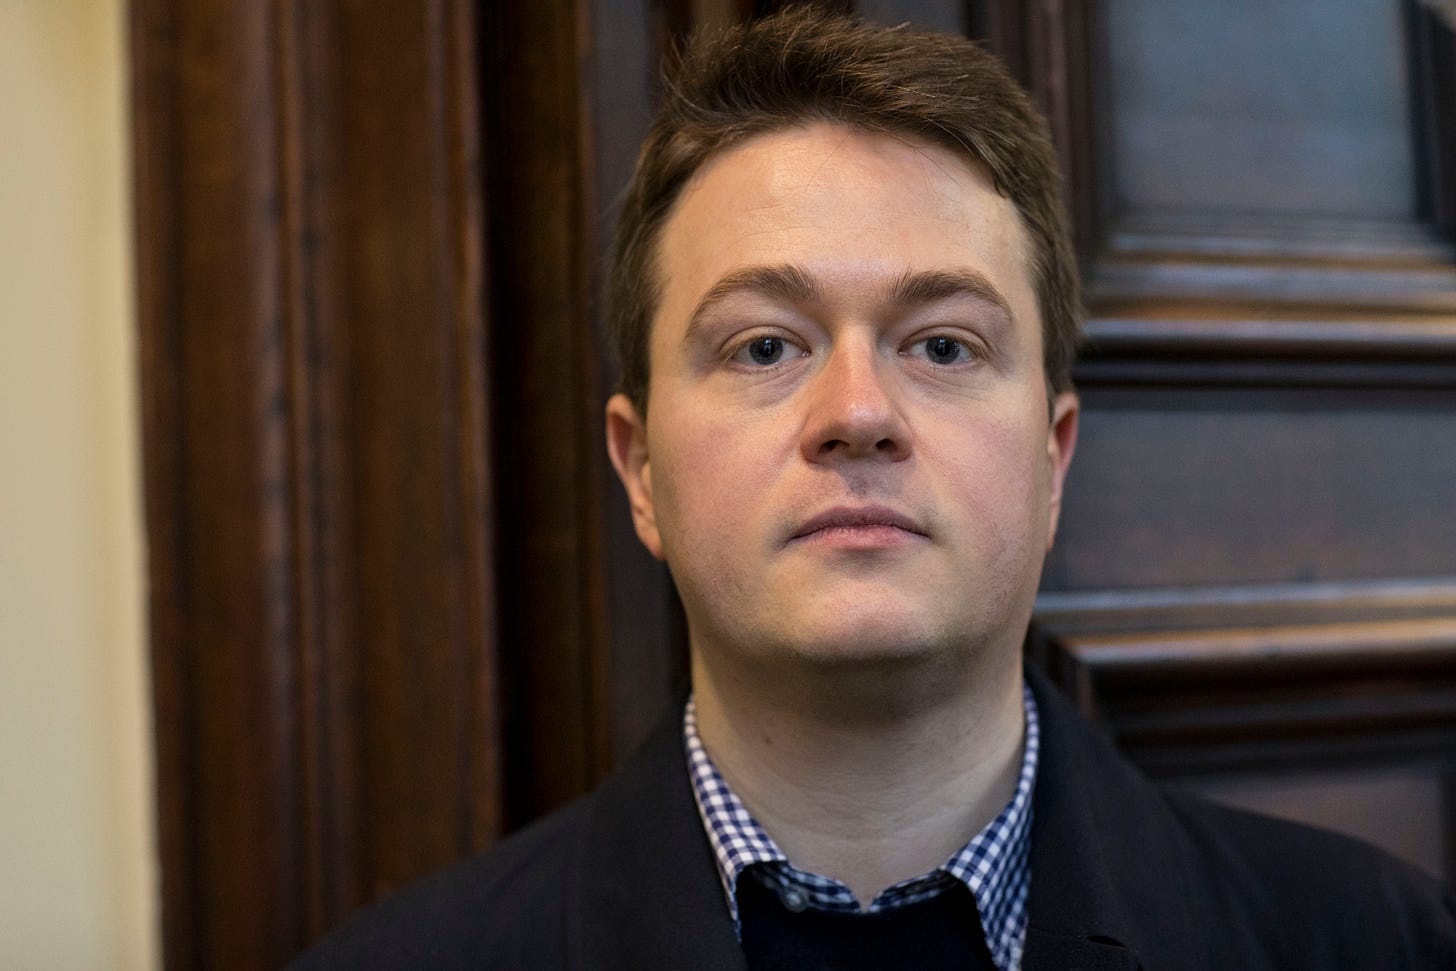 Johann Hari at the FT Weekend Oxford Literary Festival on March 22, 2018 in Oxford, England. (Photo by David Levenson/Getty Images).